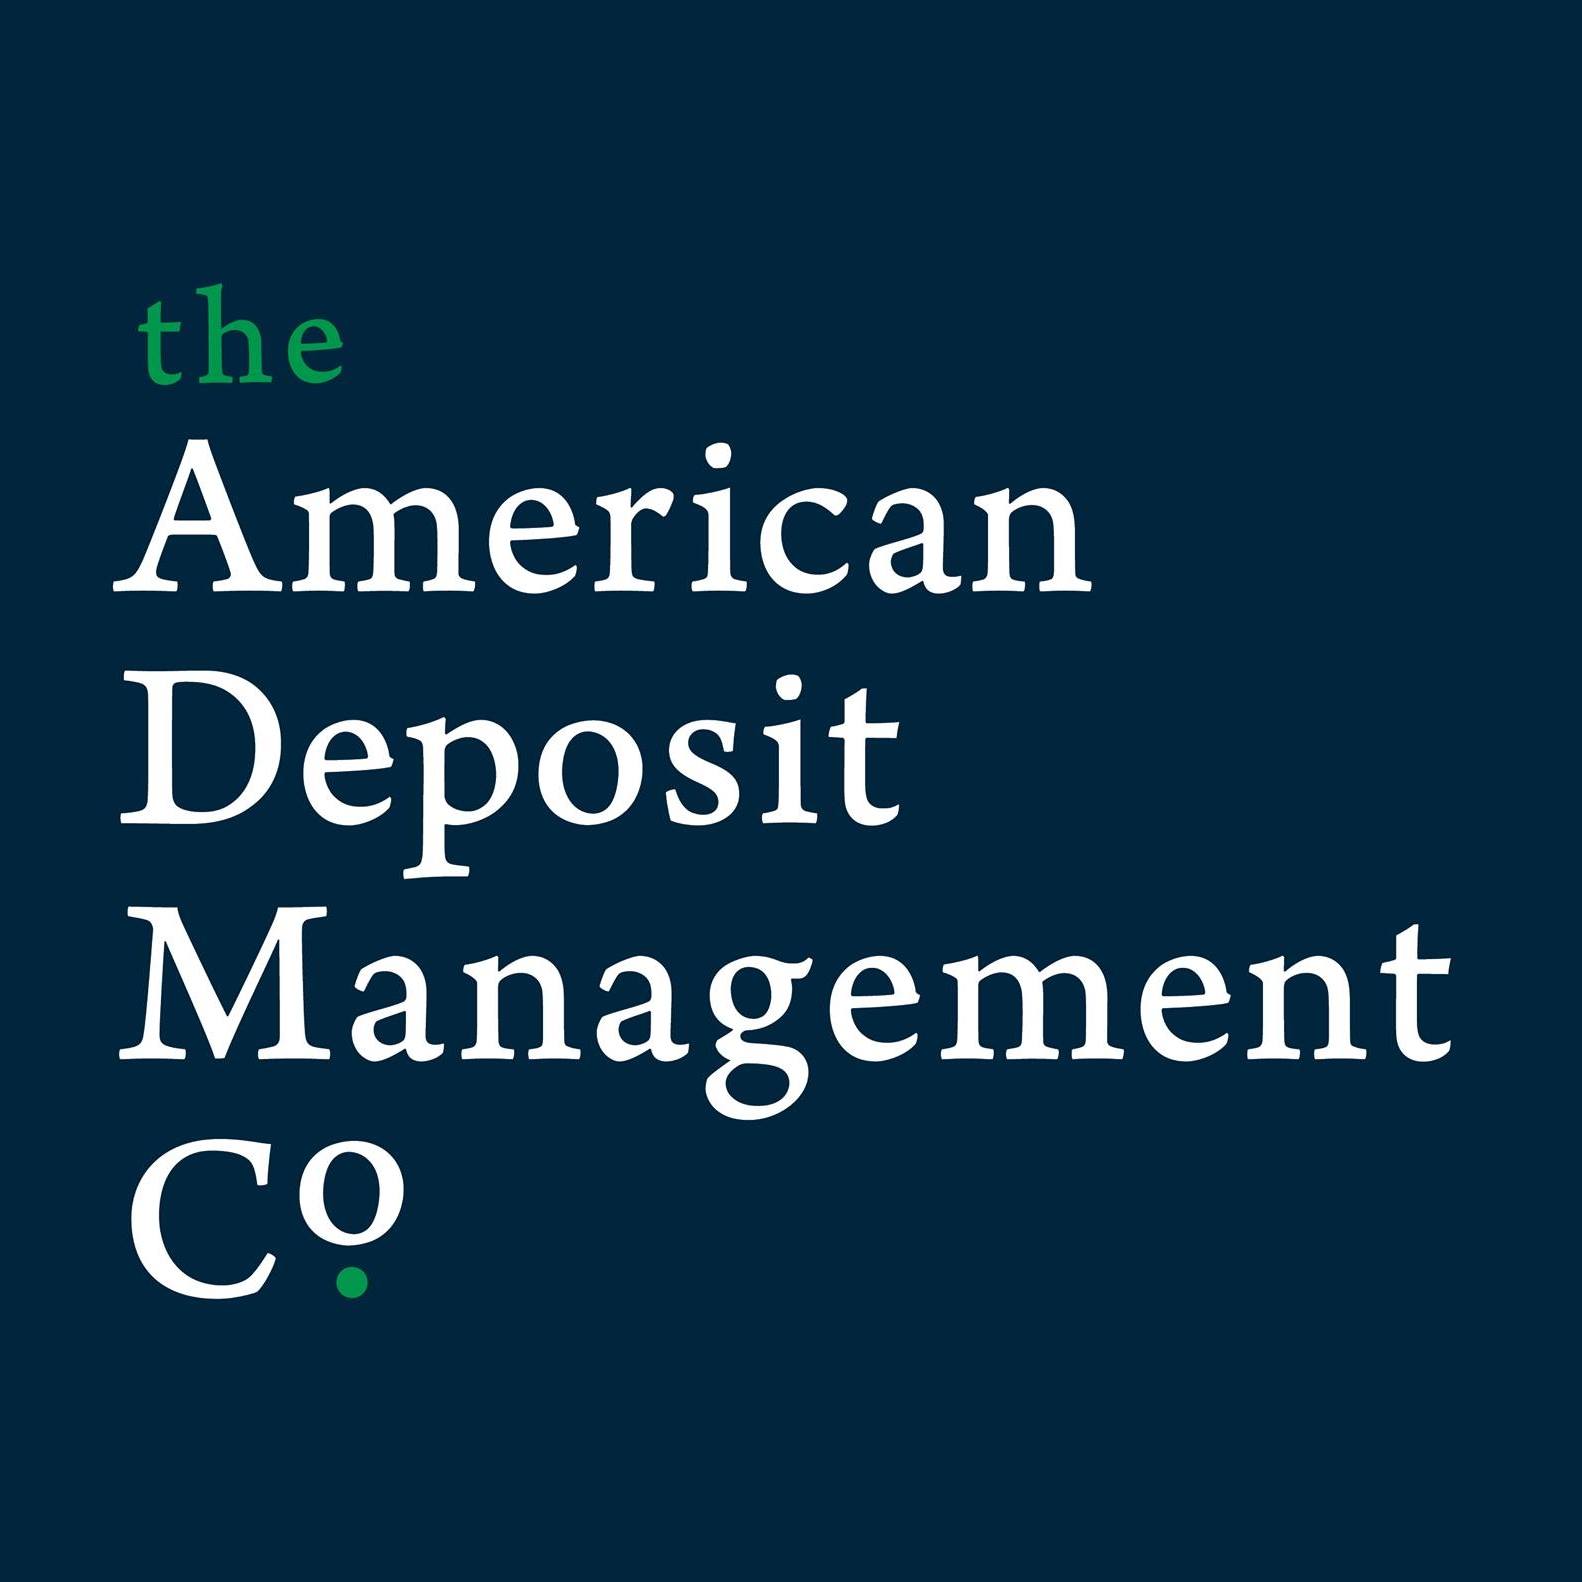 The American Deposit Management Co.